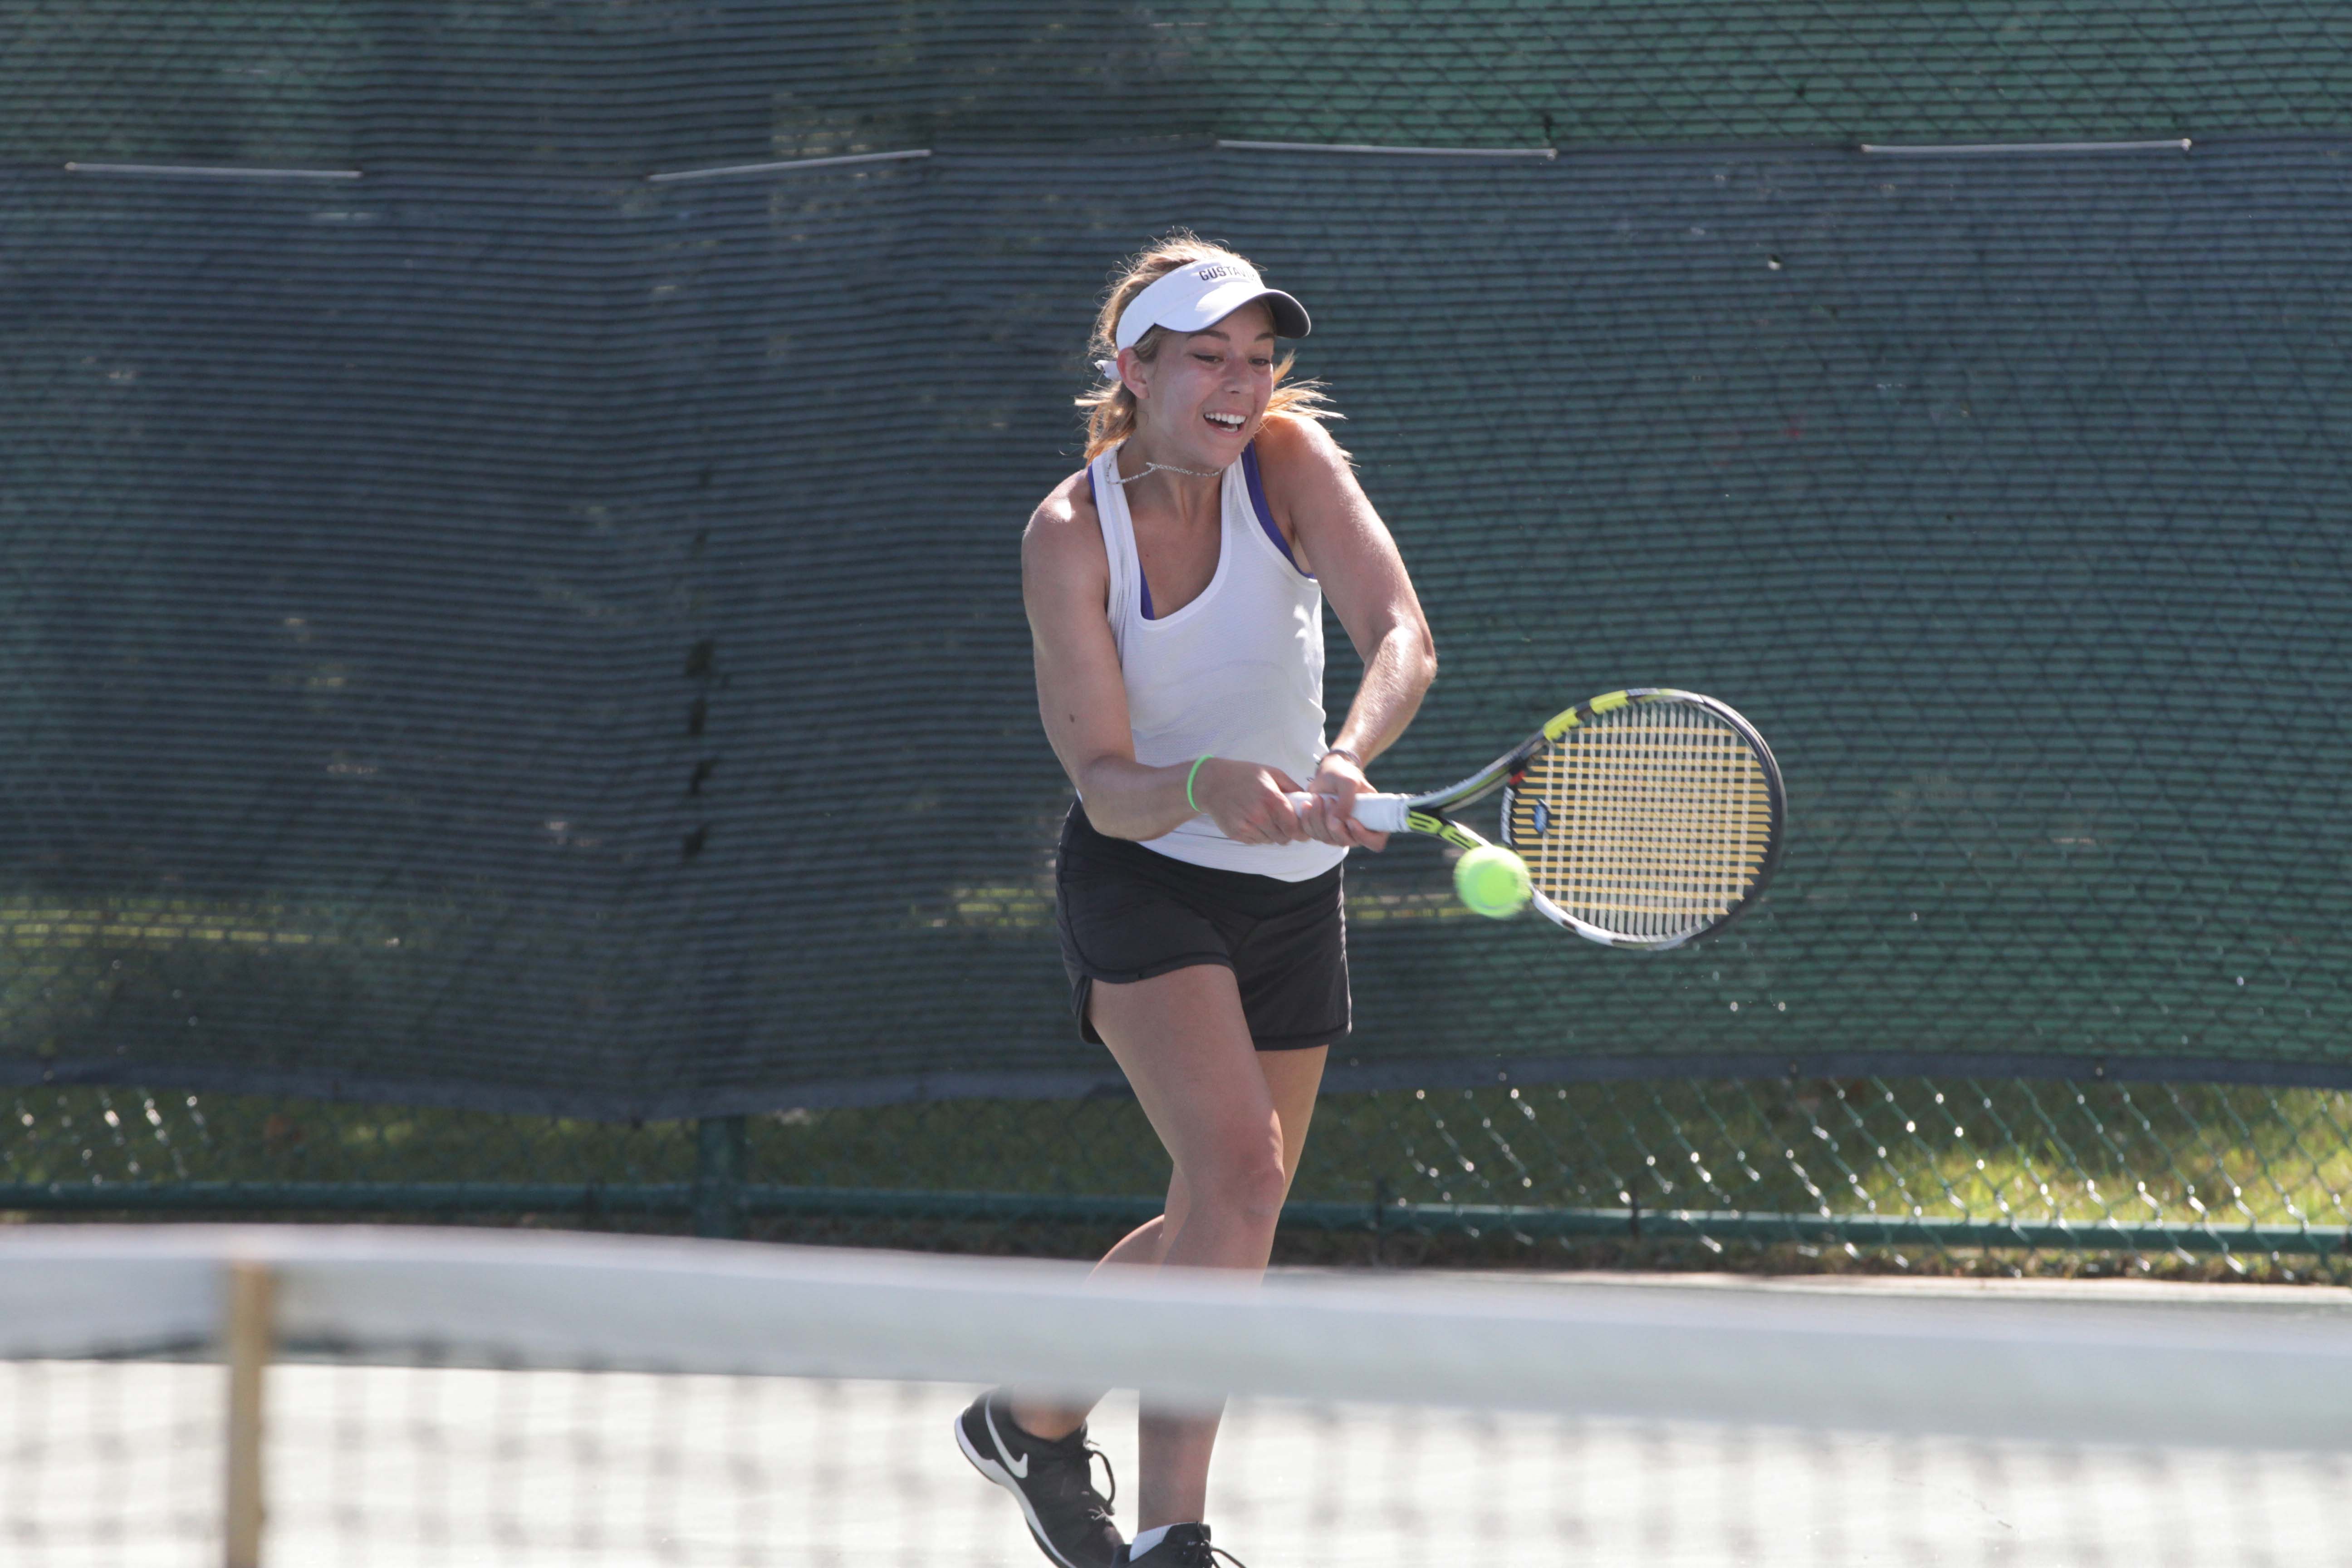 Sophomore Ginger Valentine competes in a match earlier this season. The Gusties are currently nationally ranked at the No. 33 spot.